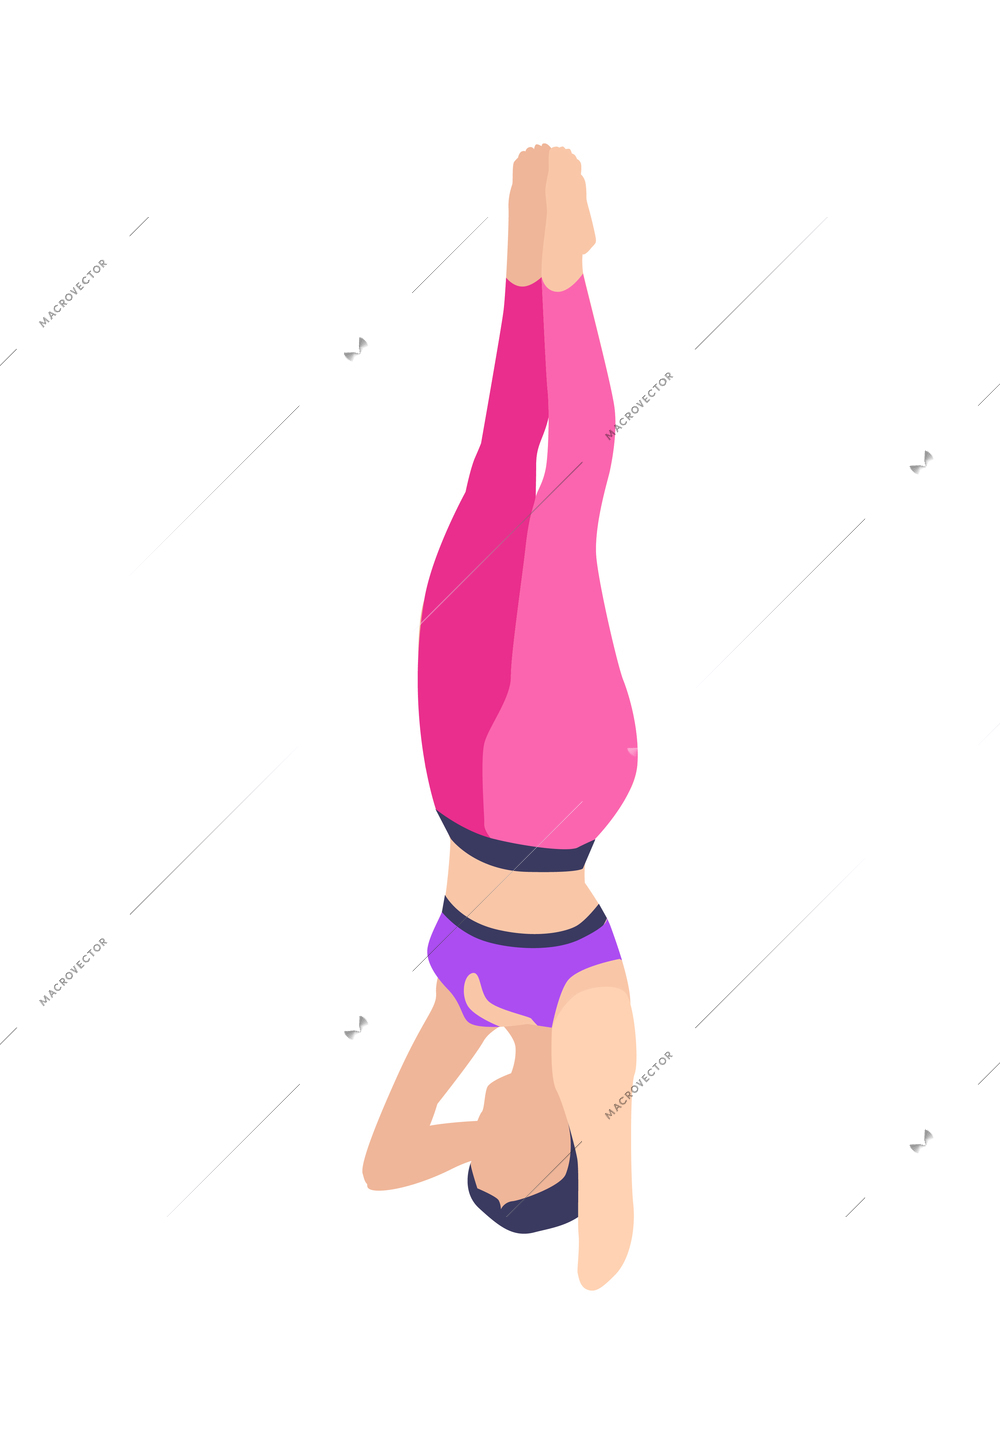 Isometric icon with woman doing yoga position 3d vector illustration